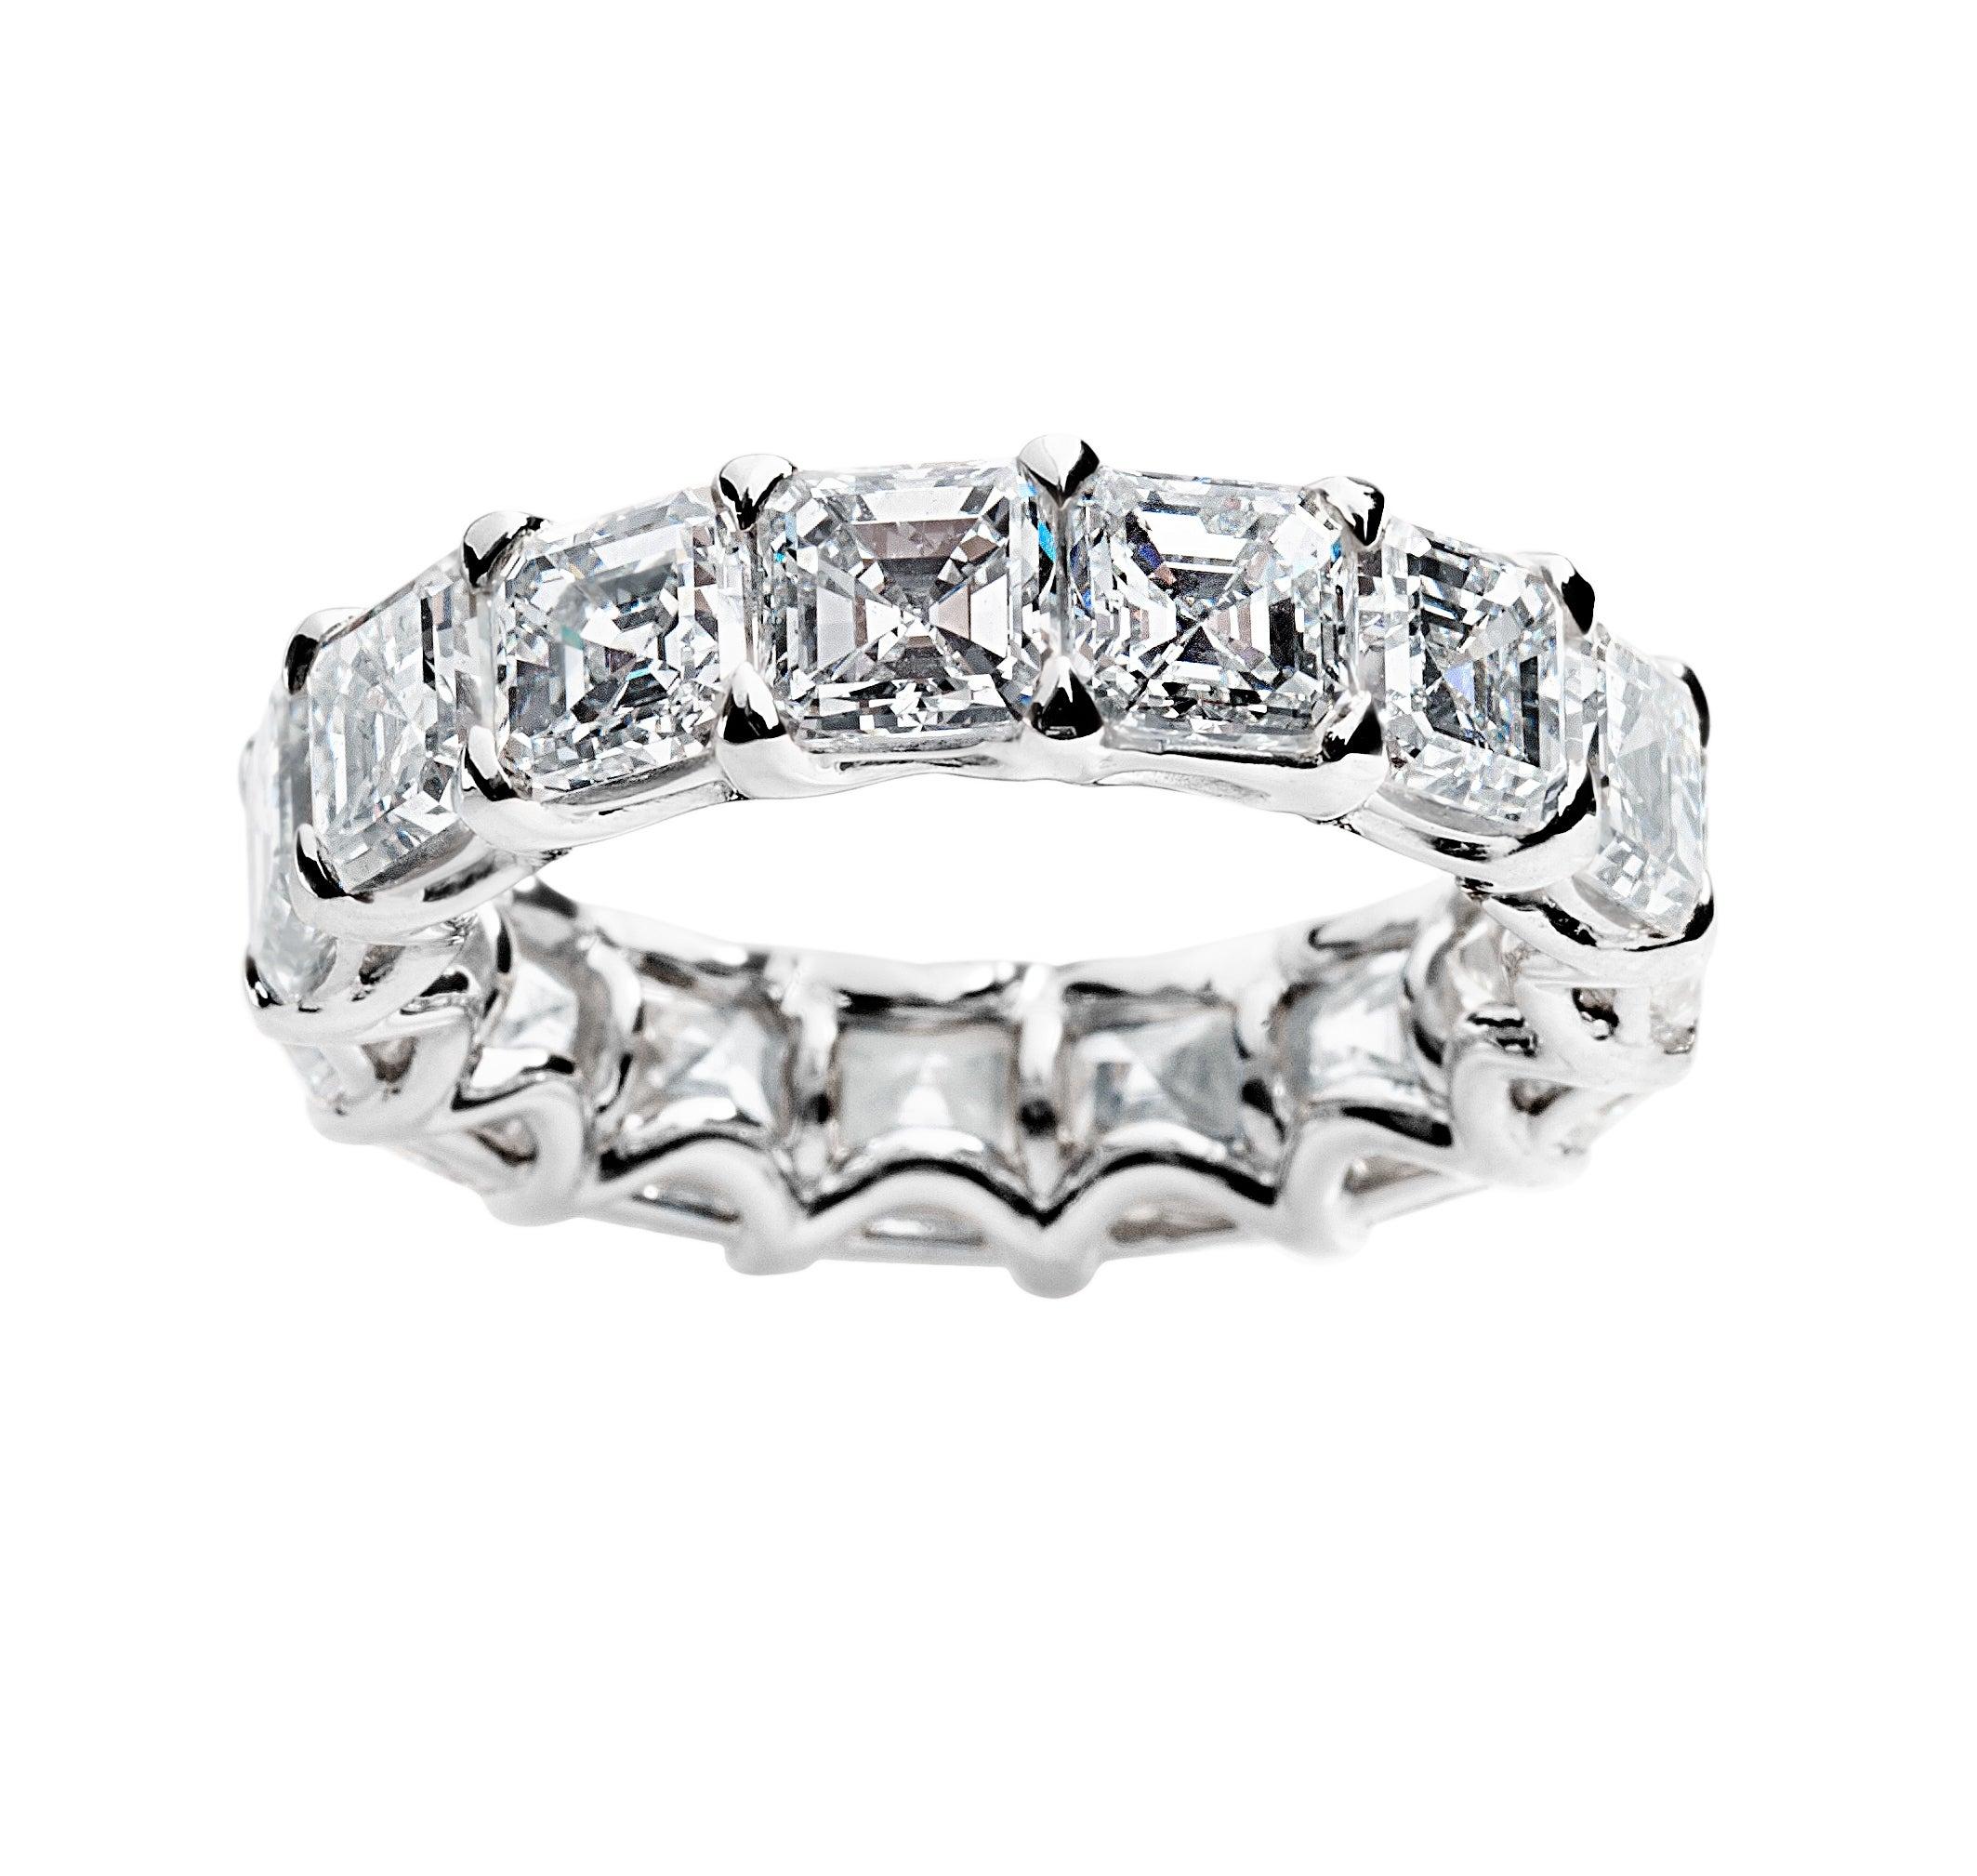 This beautiful ring features 15 perfectly matched Asscher Cut Diamonds weighing 7.69 Carats.
Stones are F-G color and VS Clarity.
Set in Platinum.
Size 6.